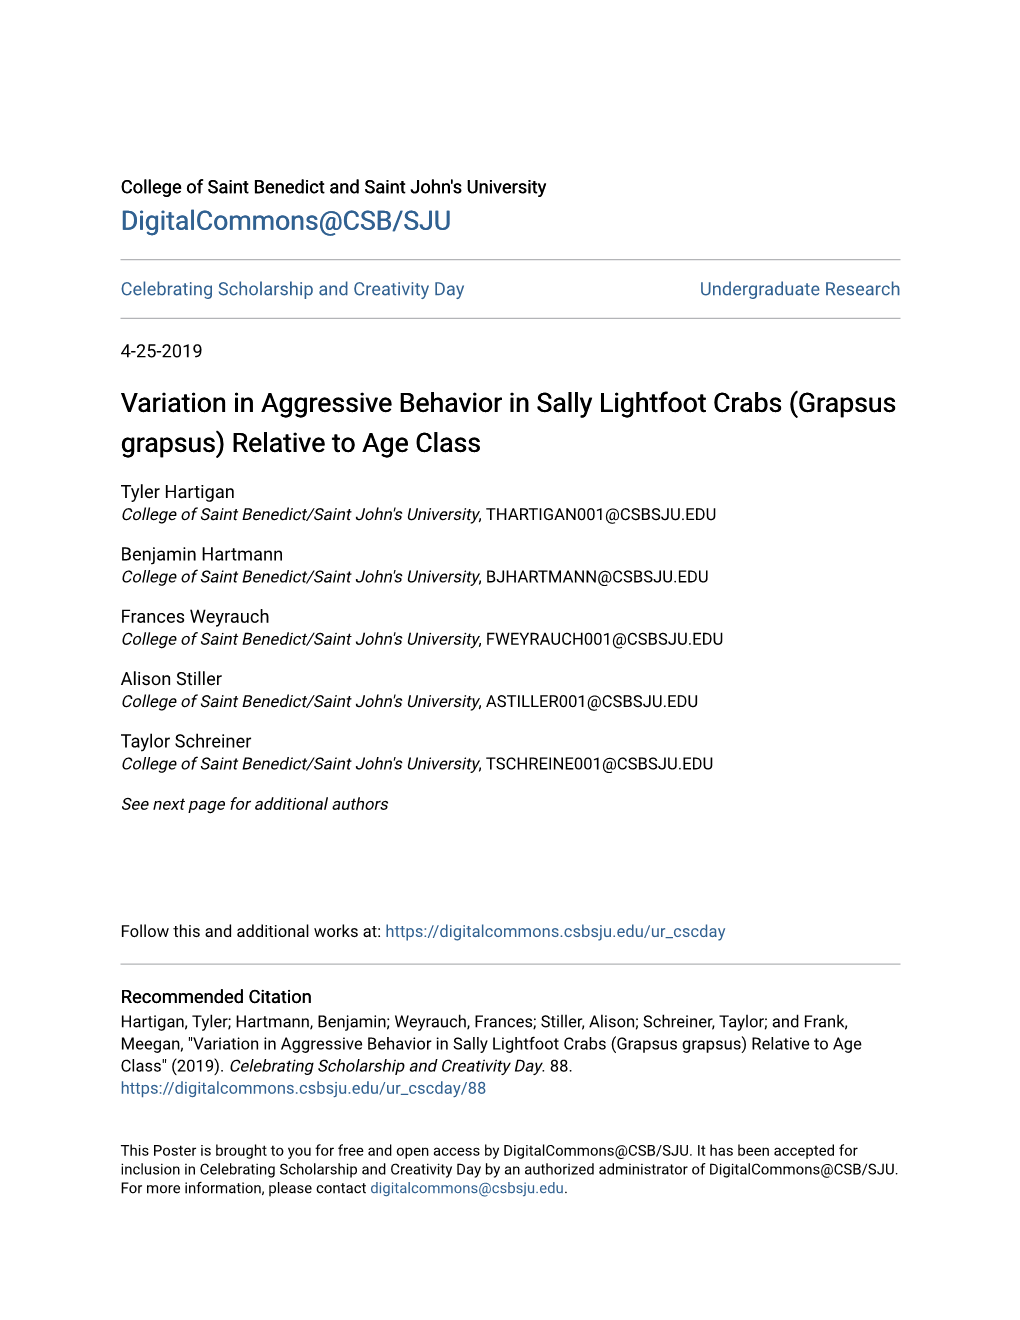 Variation in Aggressive Behavior in Sally Lightfoot Crabs (Grapsus Grapsus) Relative to Age Class